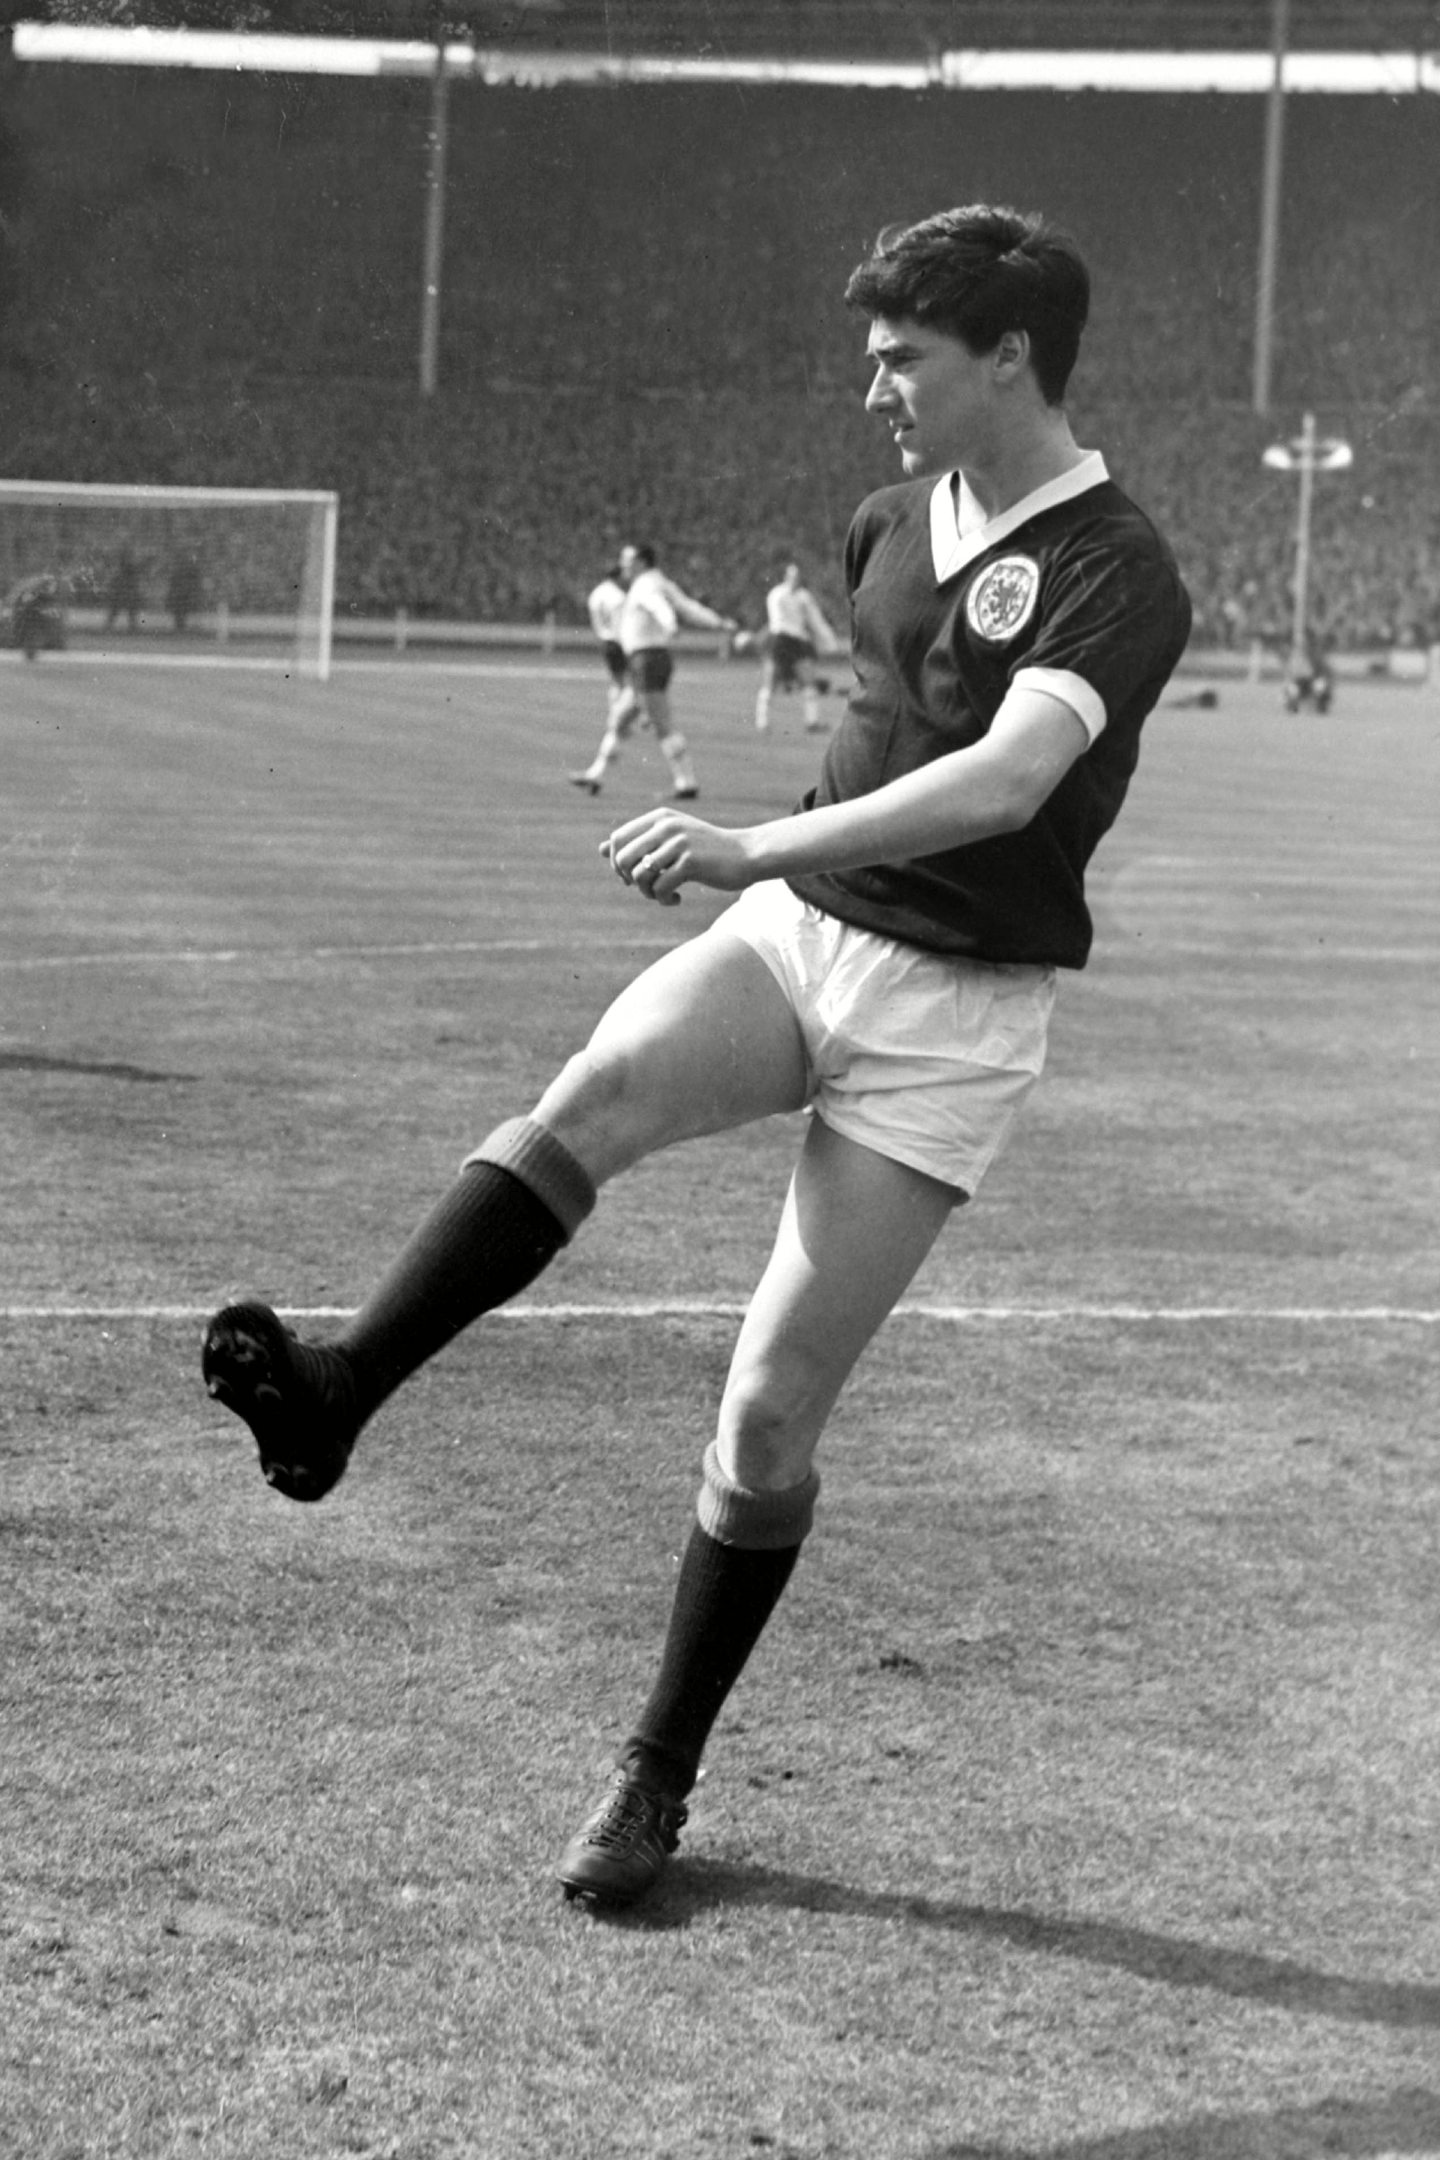 Jim Baxter on the pitch in 1963.